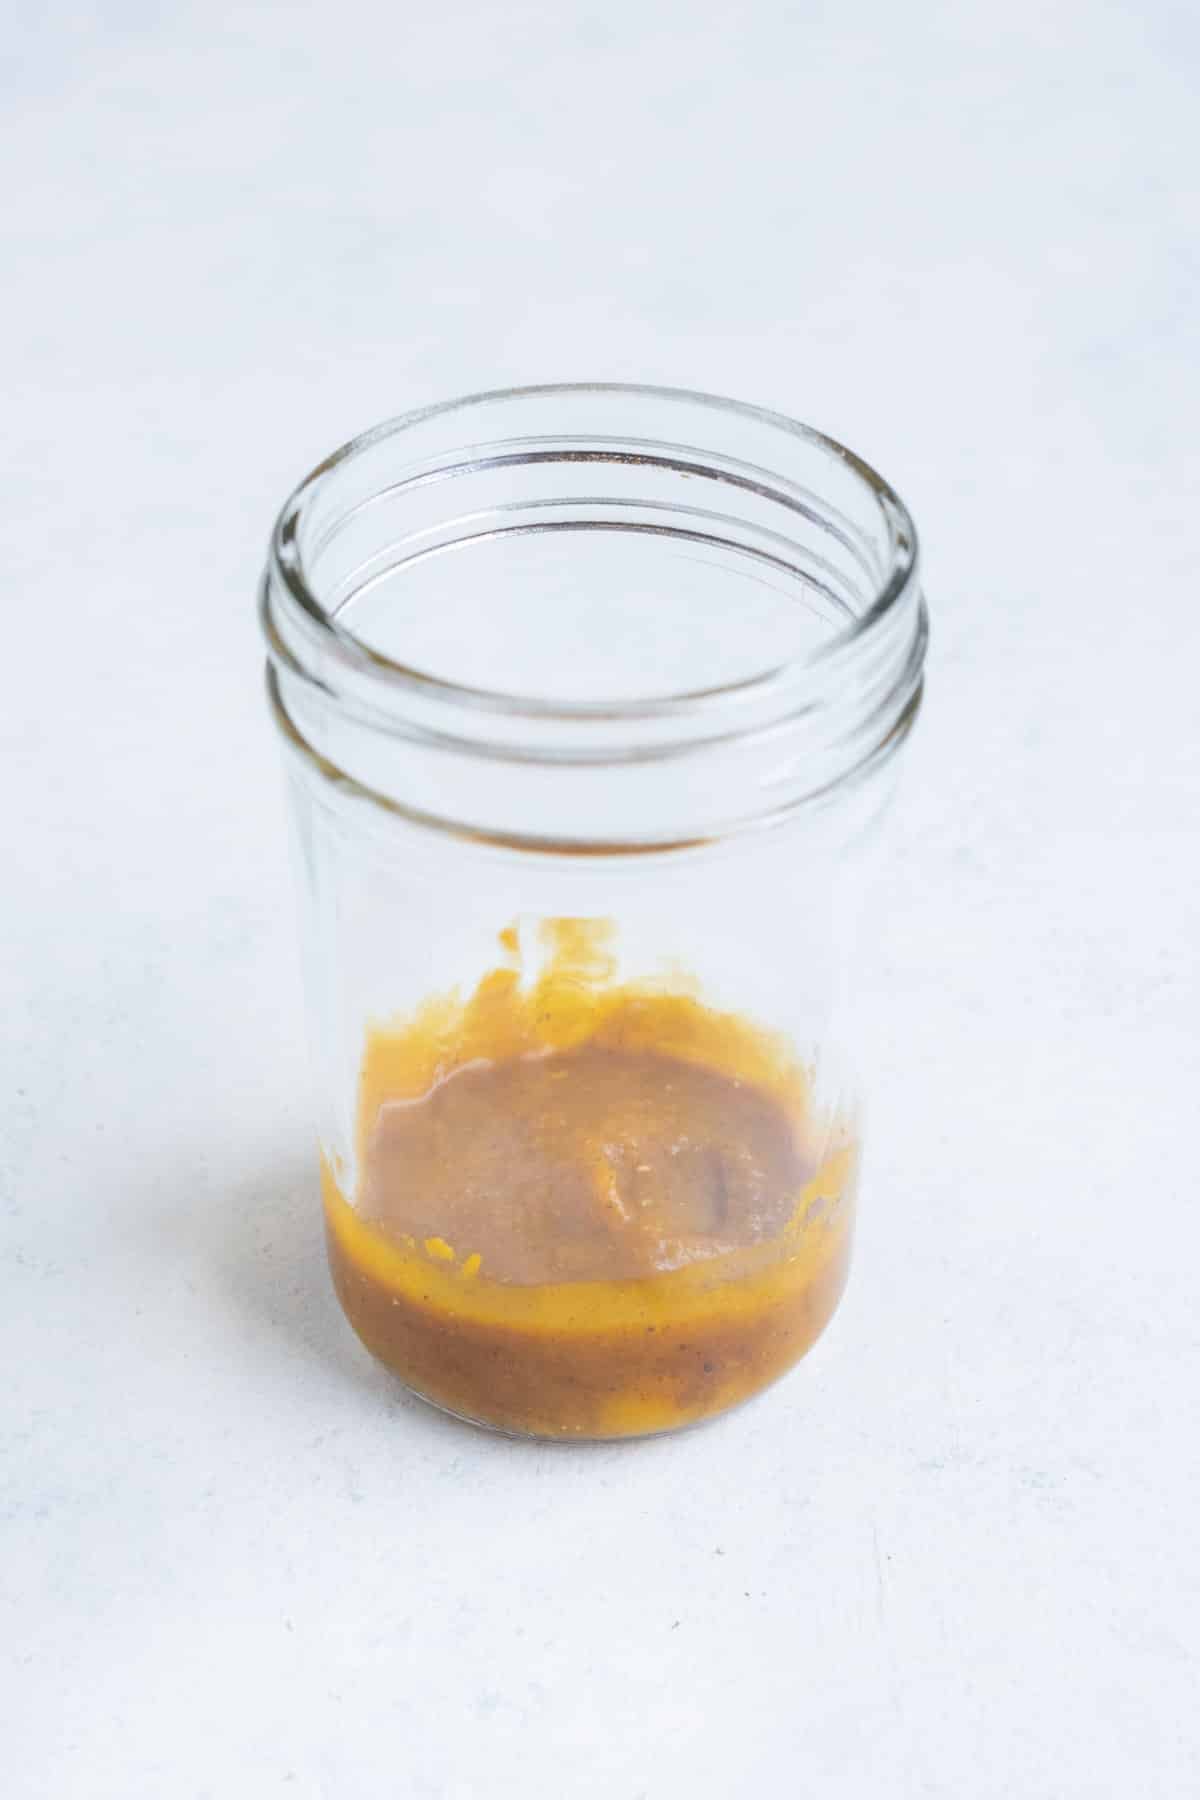 Pumpkin puree is added to the bottom of a jar.